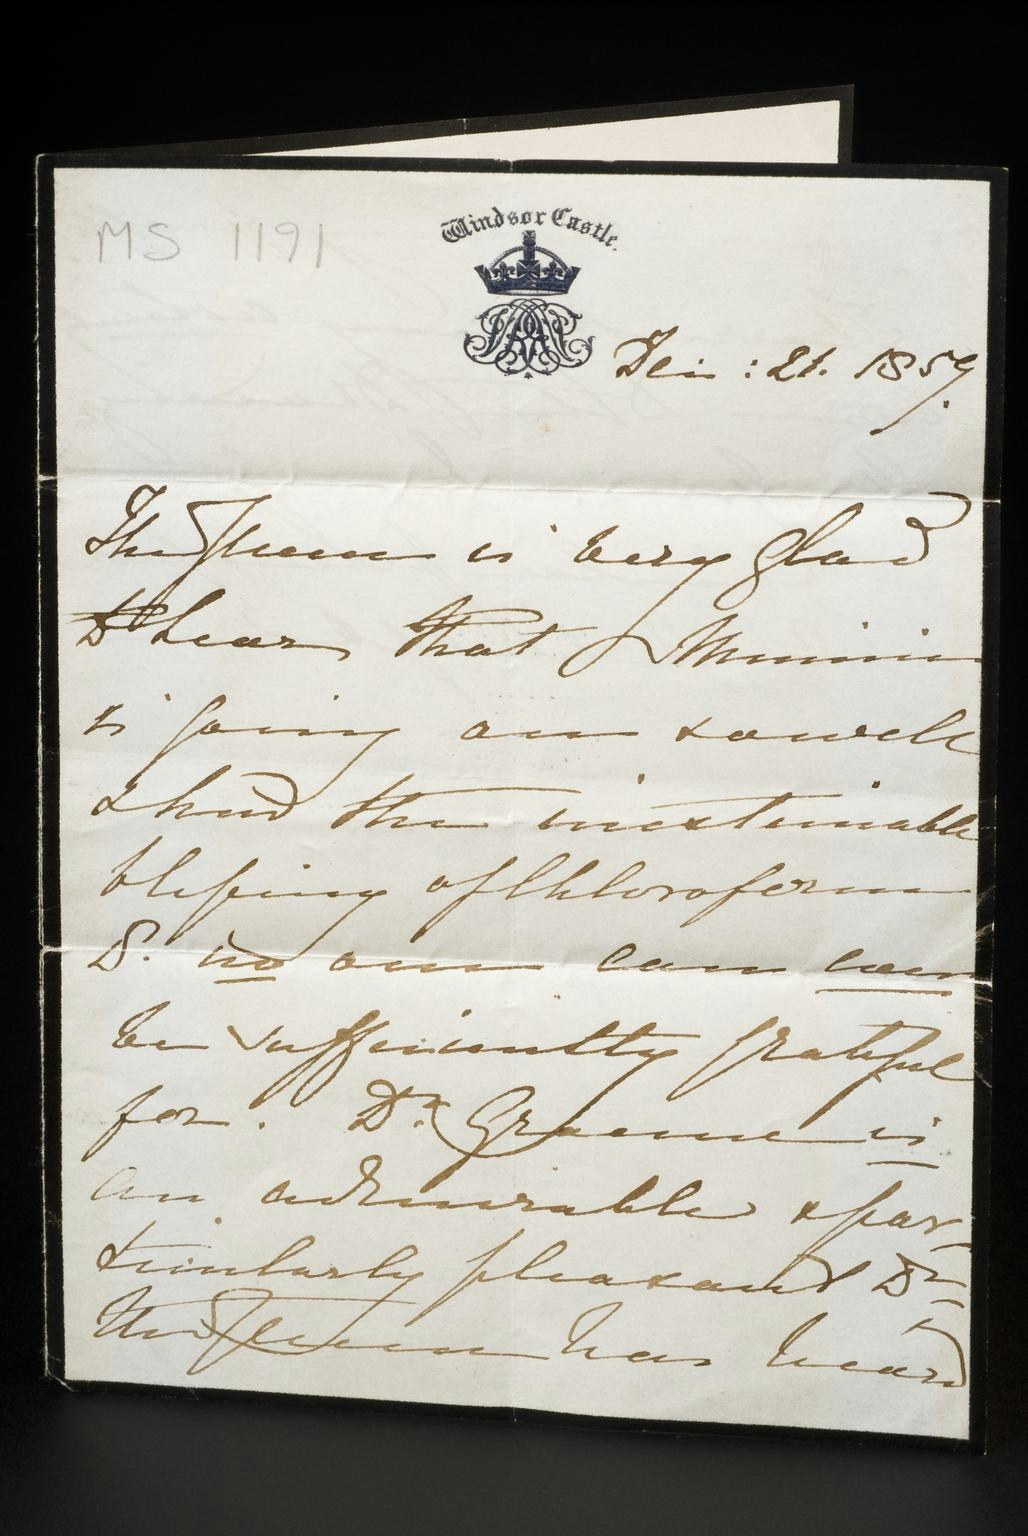 Photograph of a handwritten letter on headed notepaper, featuring the crest of Windsor Castle